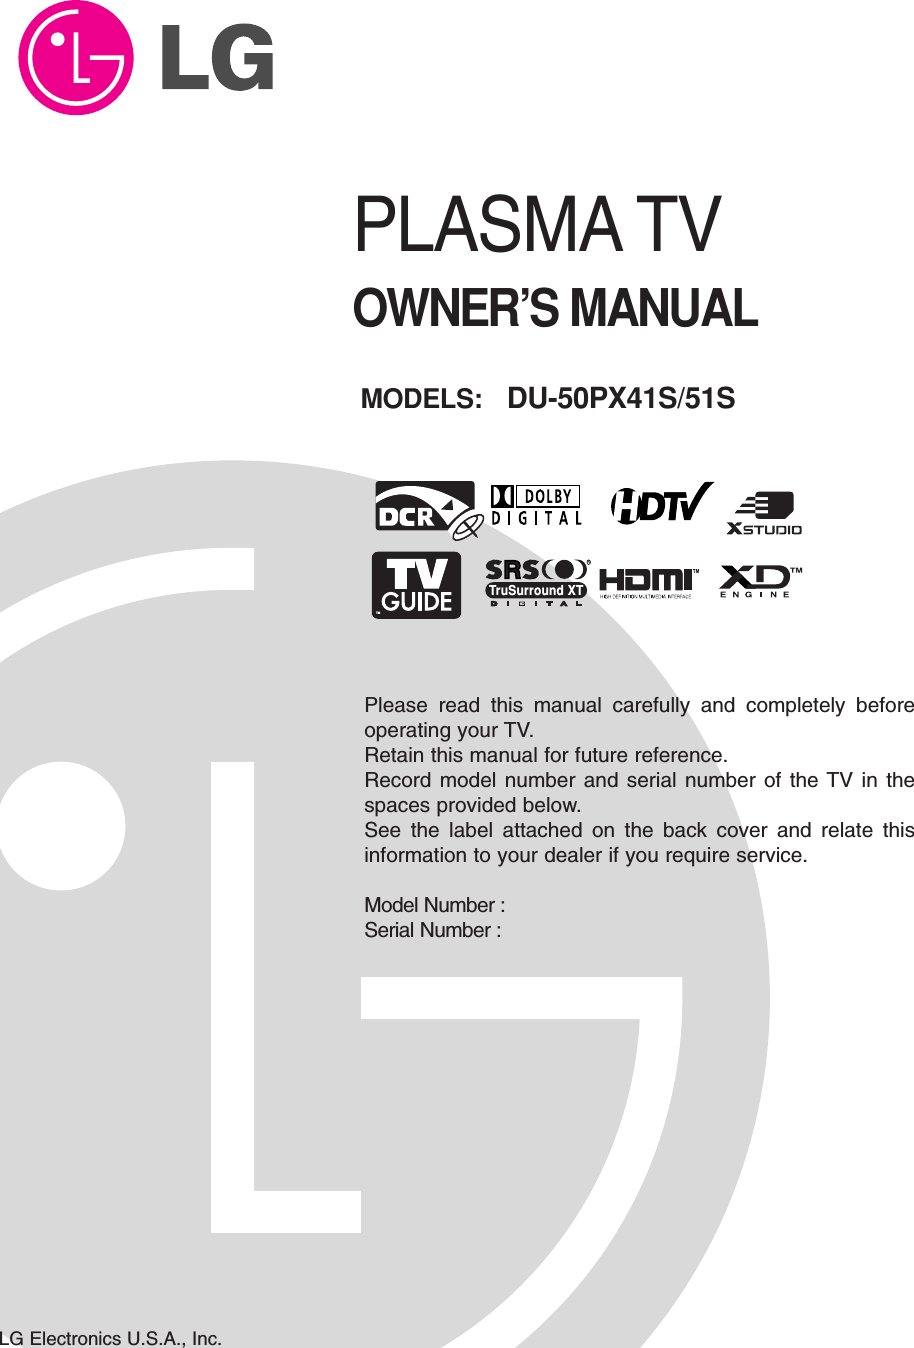 Please read this manual carefully and completely beforeoperating your TV. Retain this manual for future reference.Record model number and serial number of the TV in thespaces provided below. See the label attached on the back cover and relate thisinformation to your dealer if you require service.Model Number : Serial Number : MODELS:  DU-50PX41S/51SLG Electronics U.S.A., Inc.TMRTruSurround XTPLASMA TVOWNER’S MANUAL